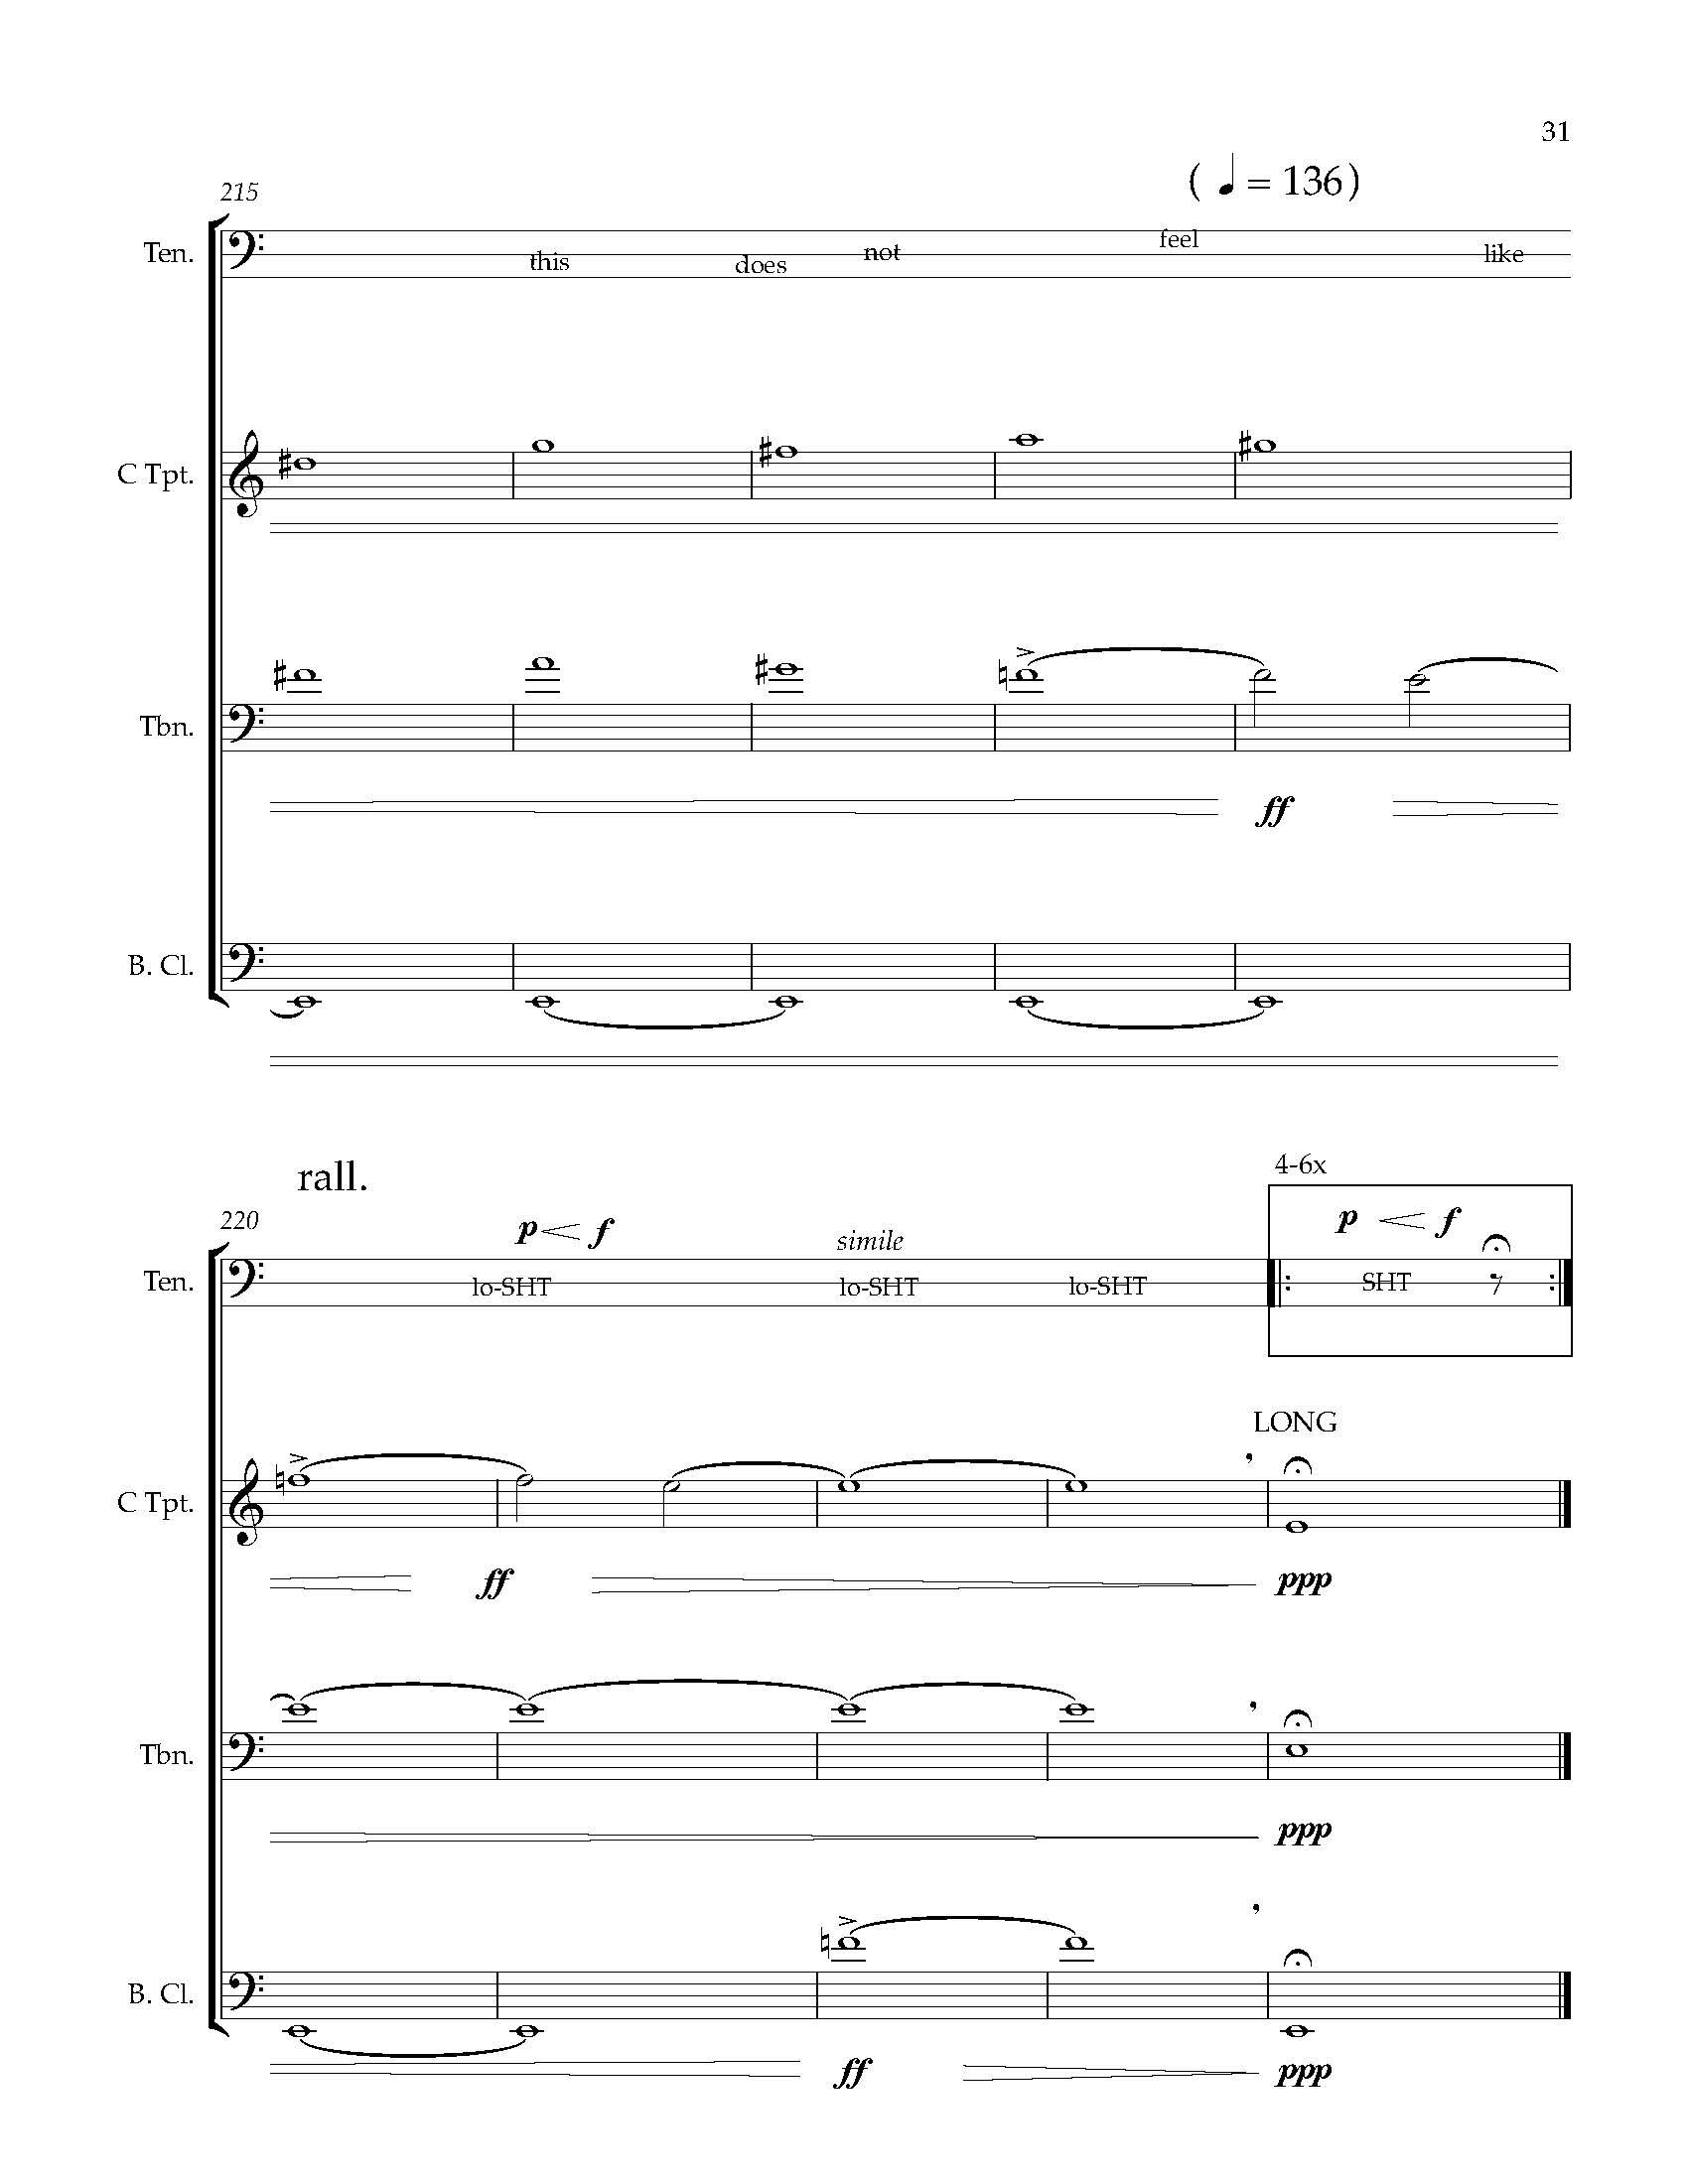 Many Worlds [1] - Complete Score_Page_40.jpg